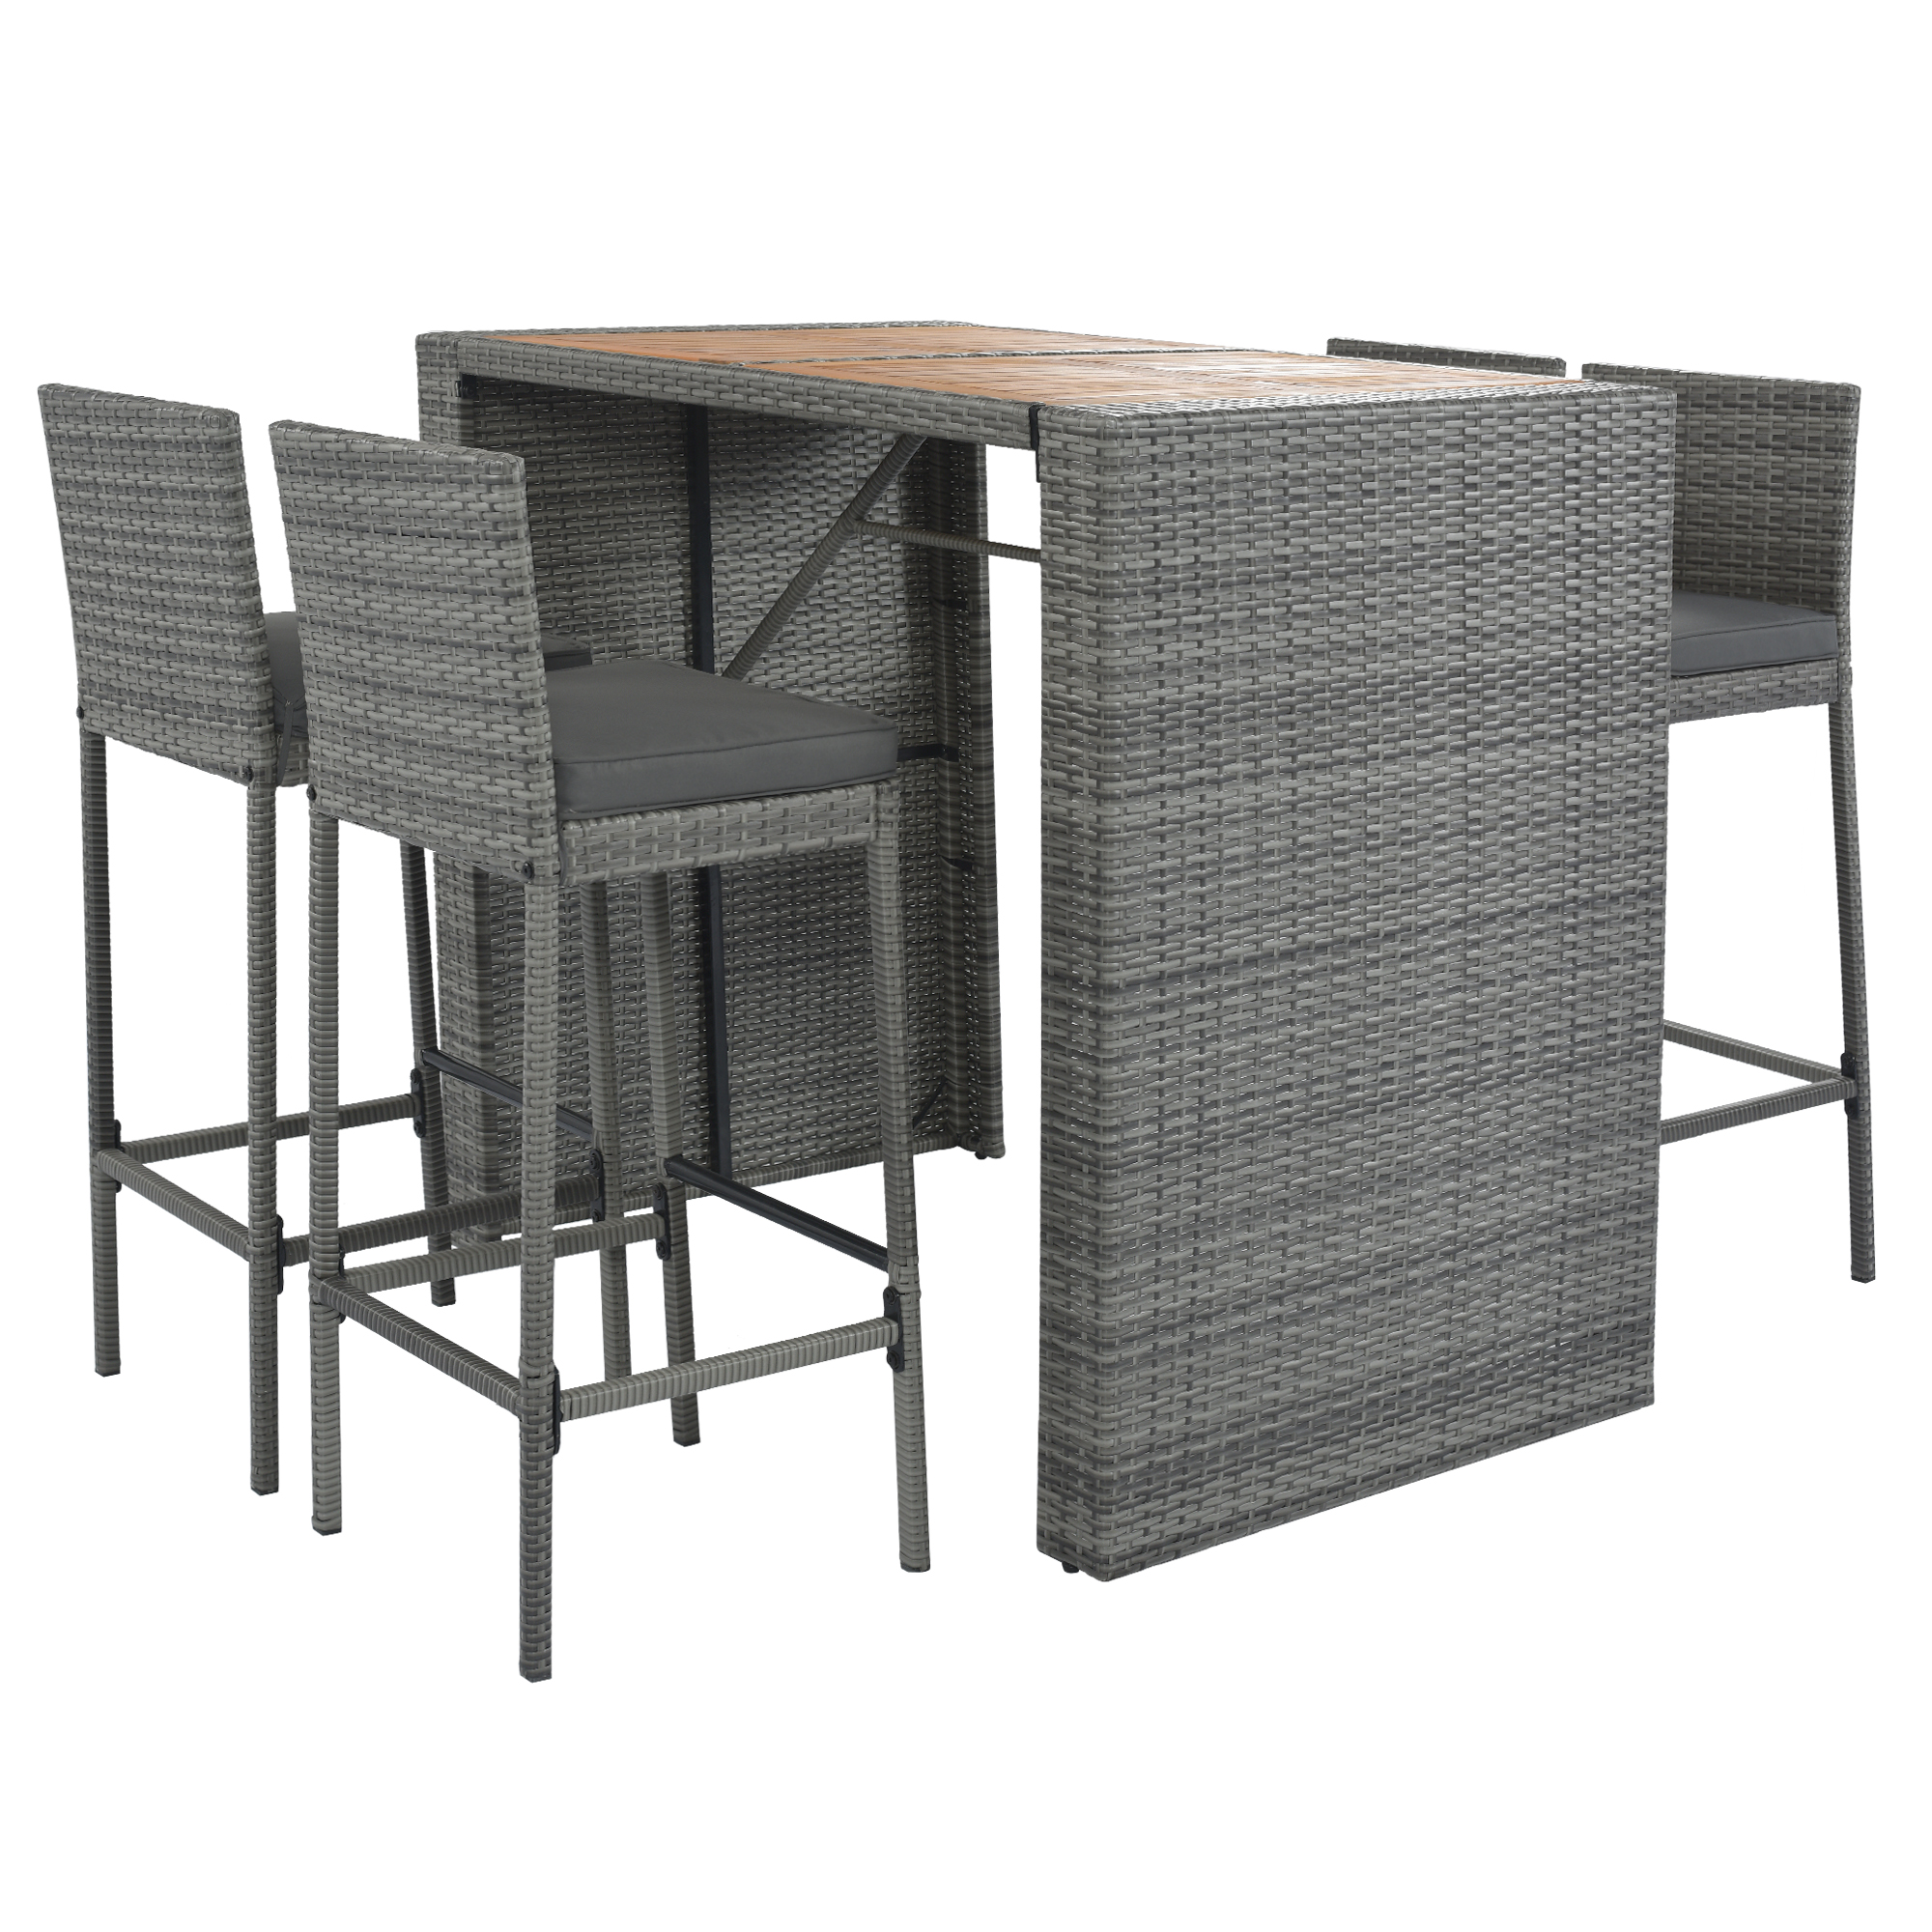 Seizeen 5 Pcs Outdoor Bar Set, Patio Wicker Furniture Set with Storage Table, Wood Bar table & Cushioned Chairs with Backrest for Bistro Backyard Porch Garden Poolside, Gray - image 3 of 11